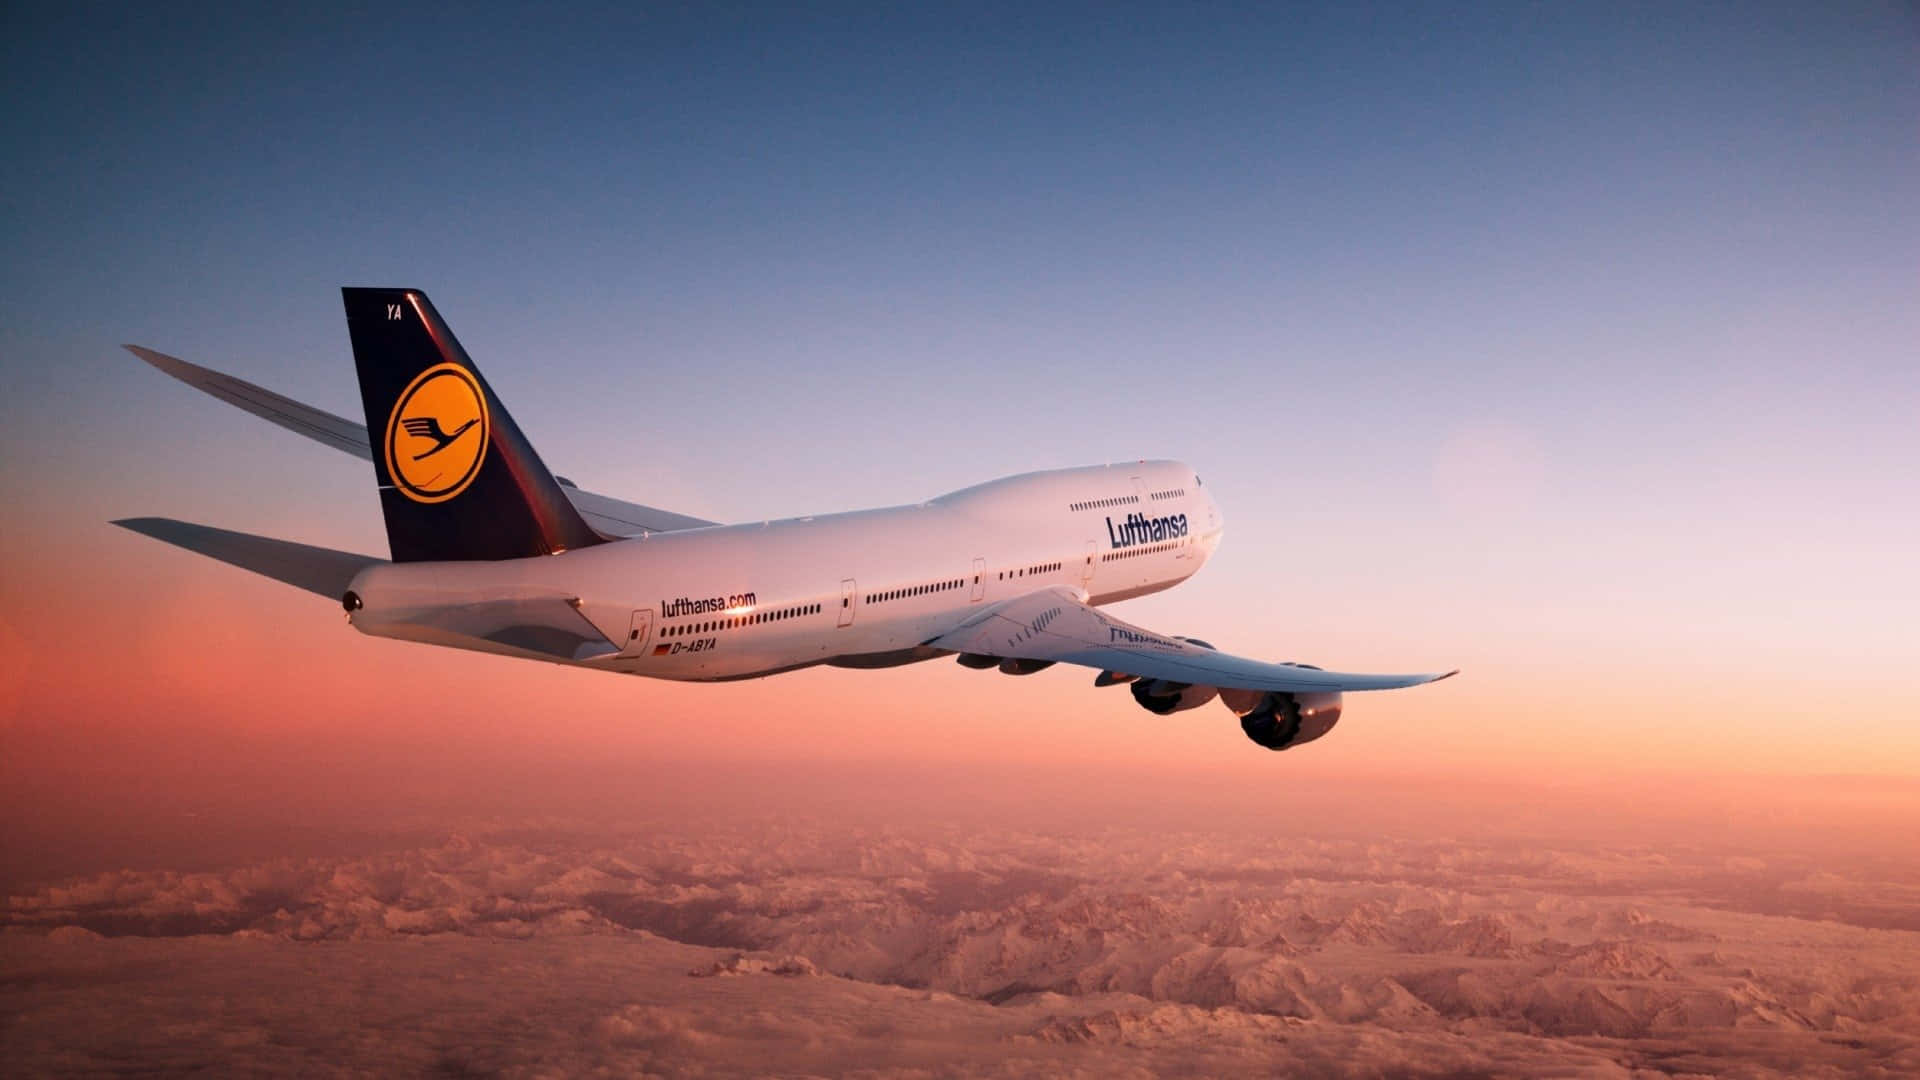 The Majestic 747 Airplane Soaring In The Skies